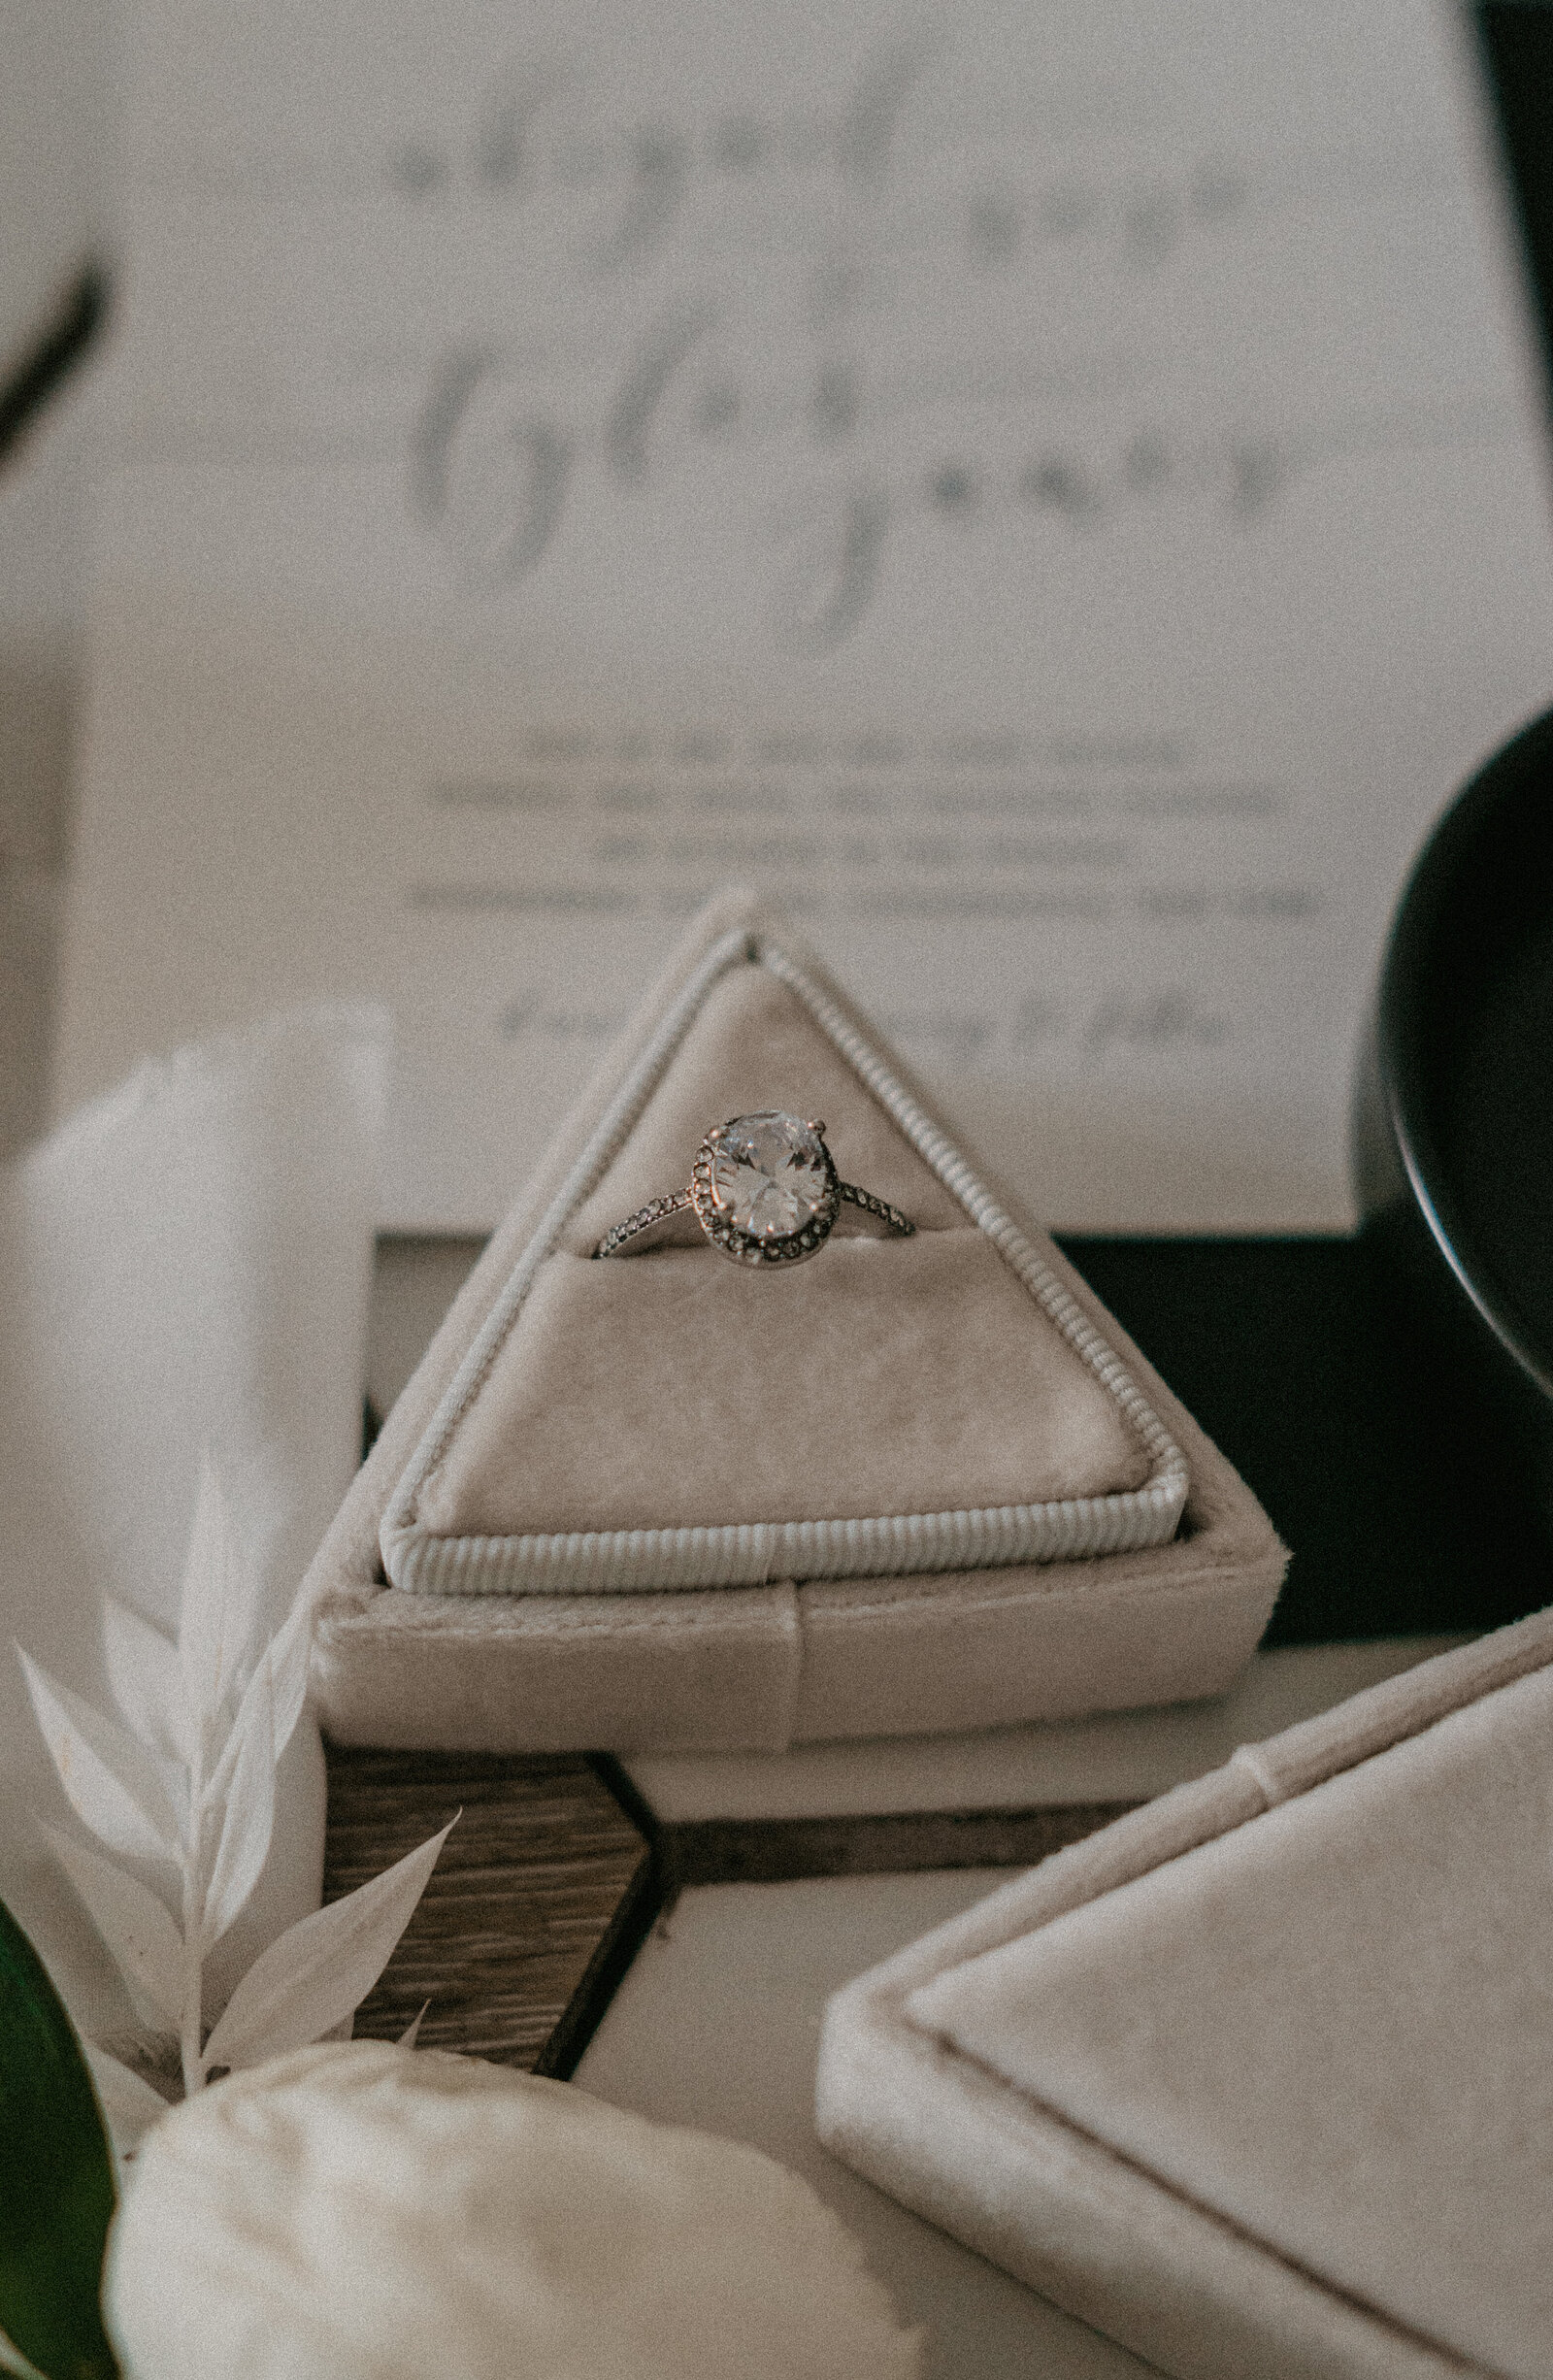 Details of wedding day including invitations, engagement ring and loose florals.